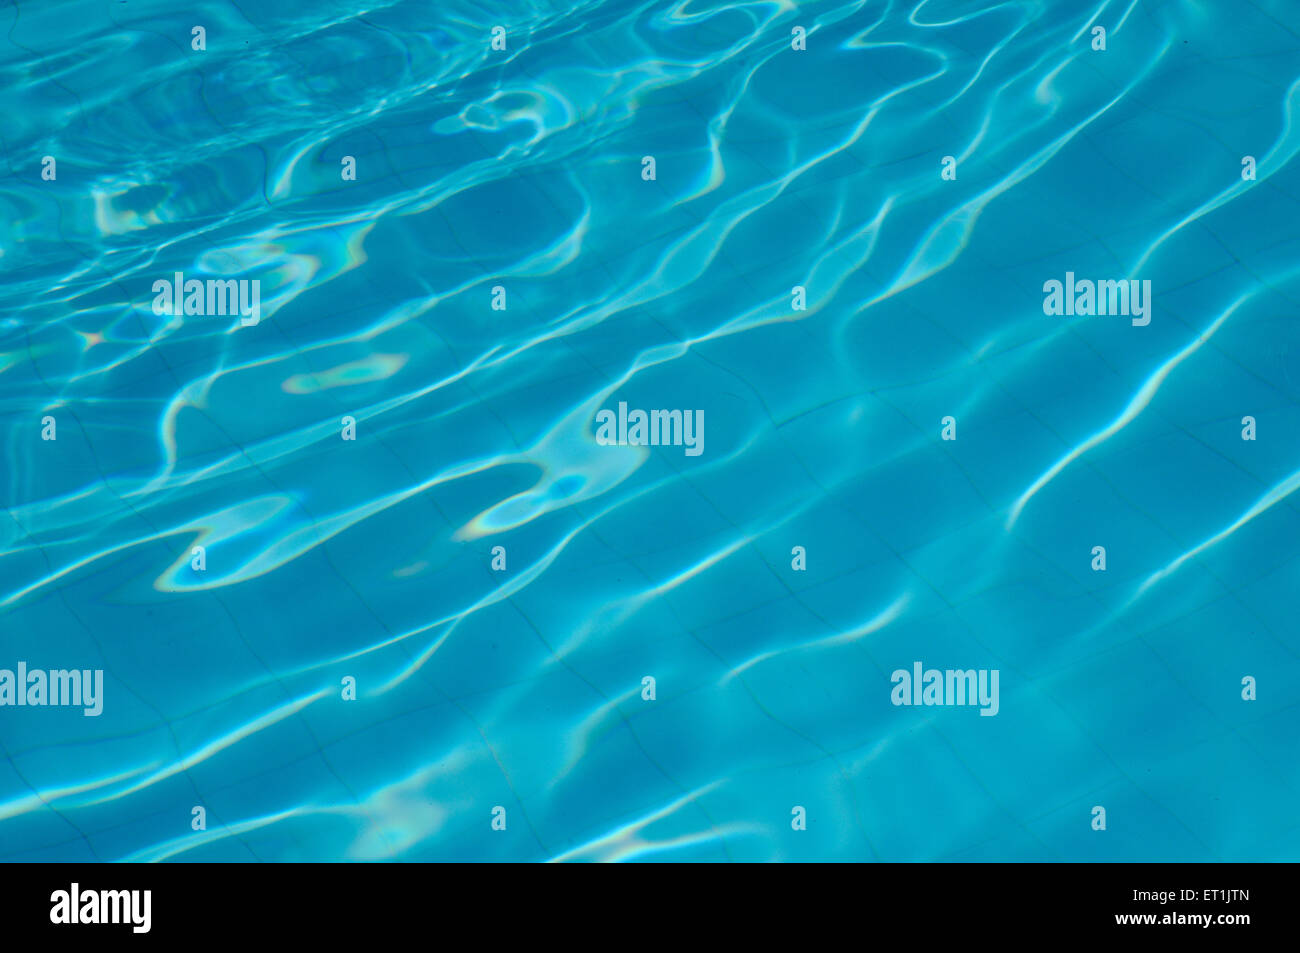 blue water ripples abstract background Stock Photo